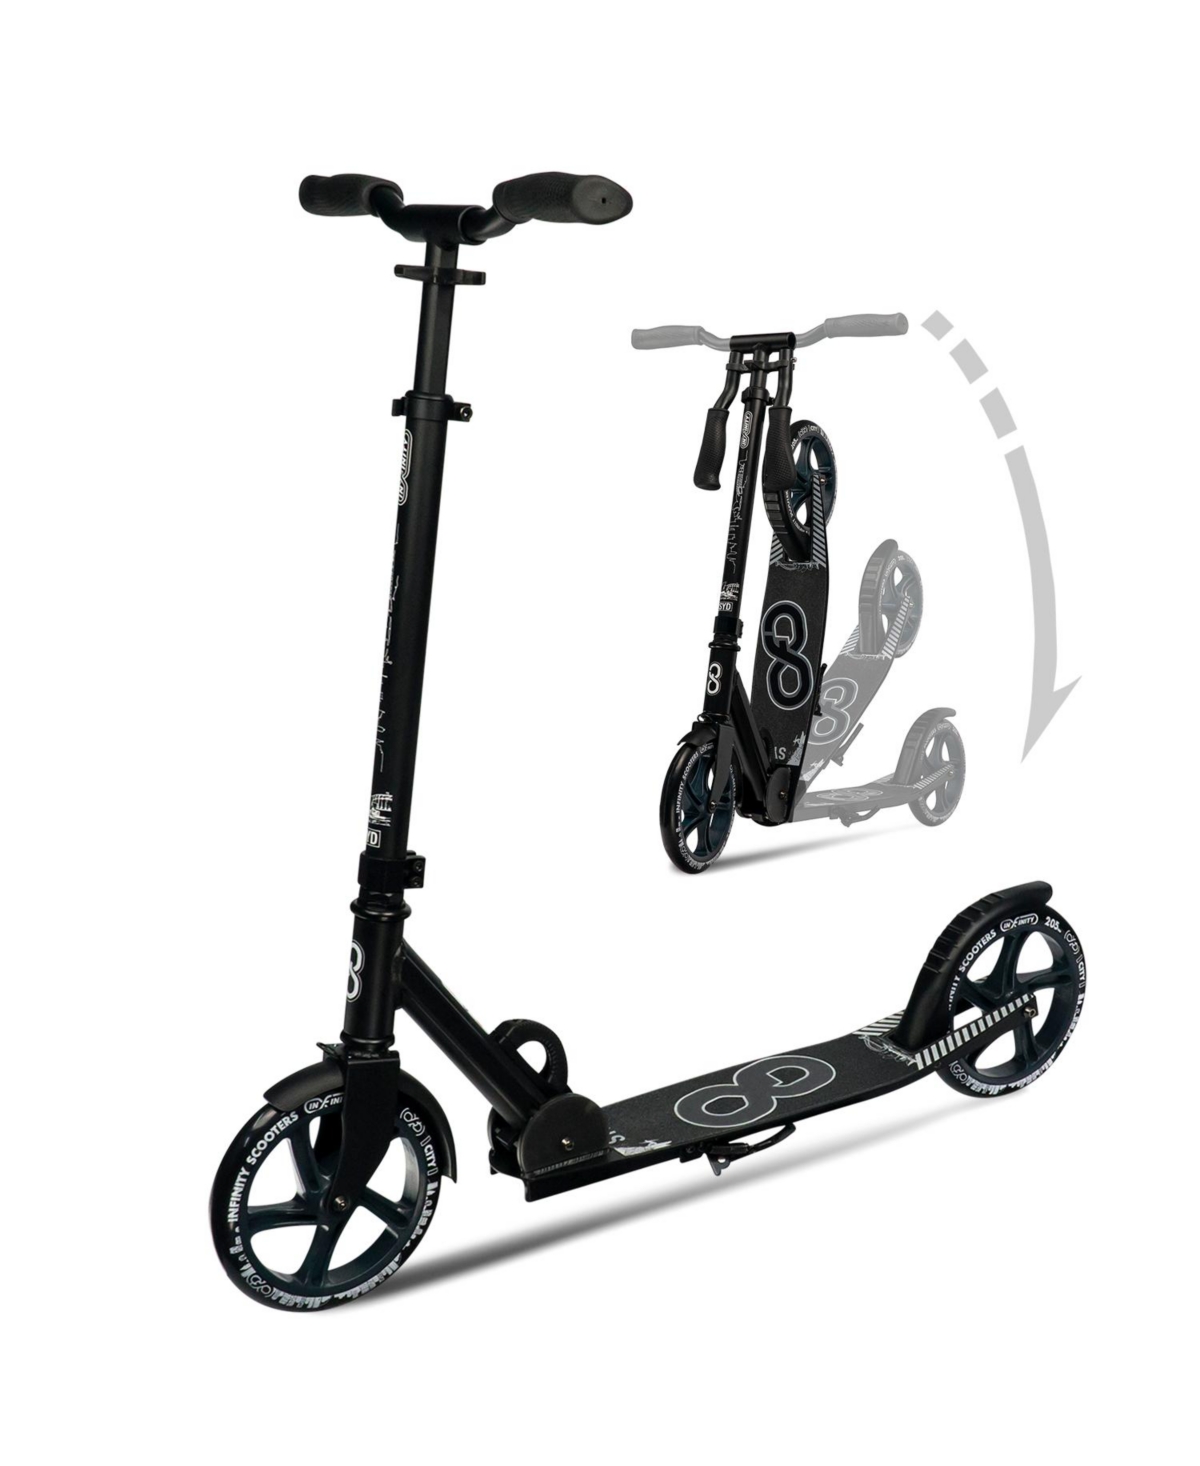 Sydney Foldable Kick Scooter - Great Scooters For Teens And Adults - White